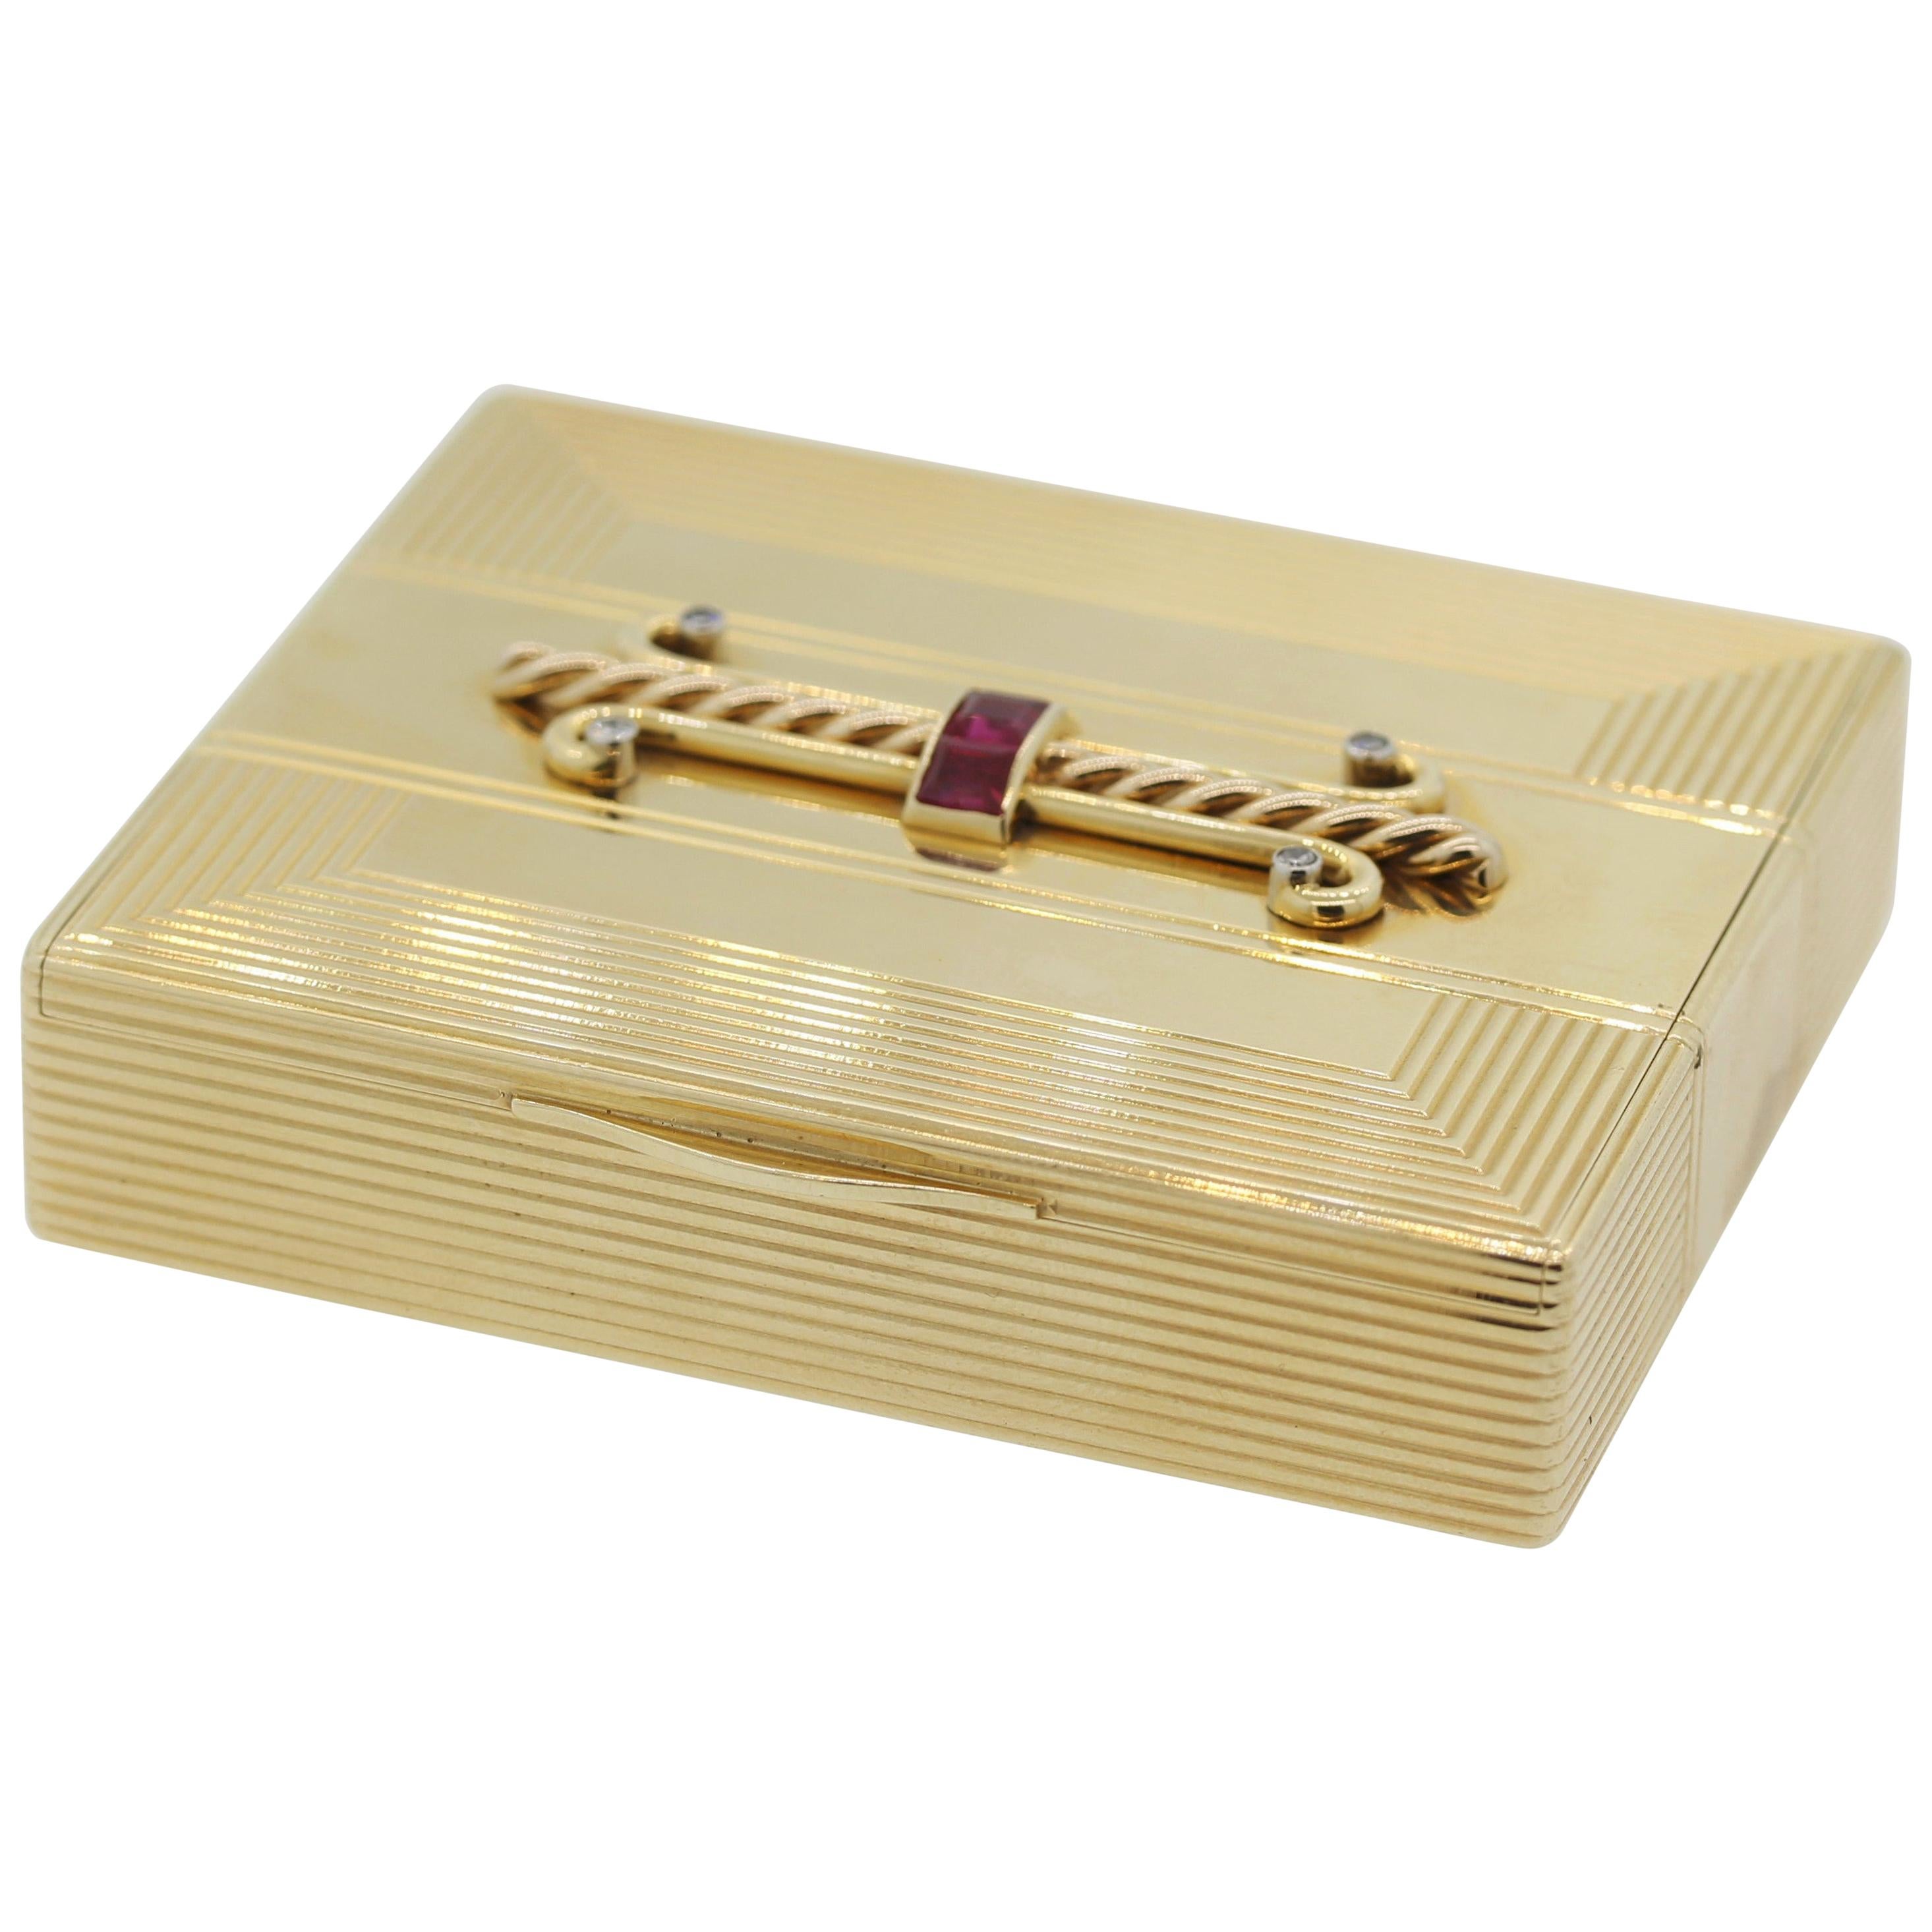 Tiffany & Co. Ruby Diamond Gold Compact Powder Case For Sale